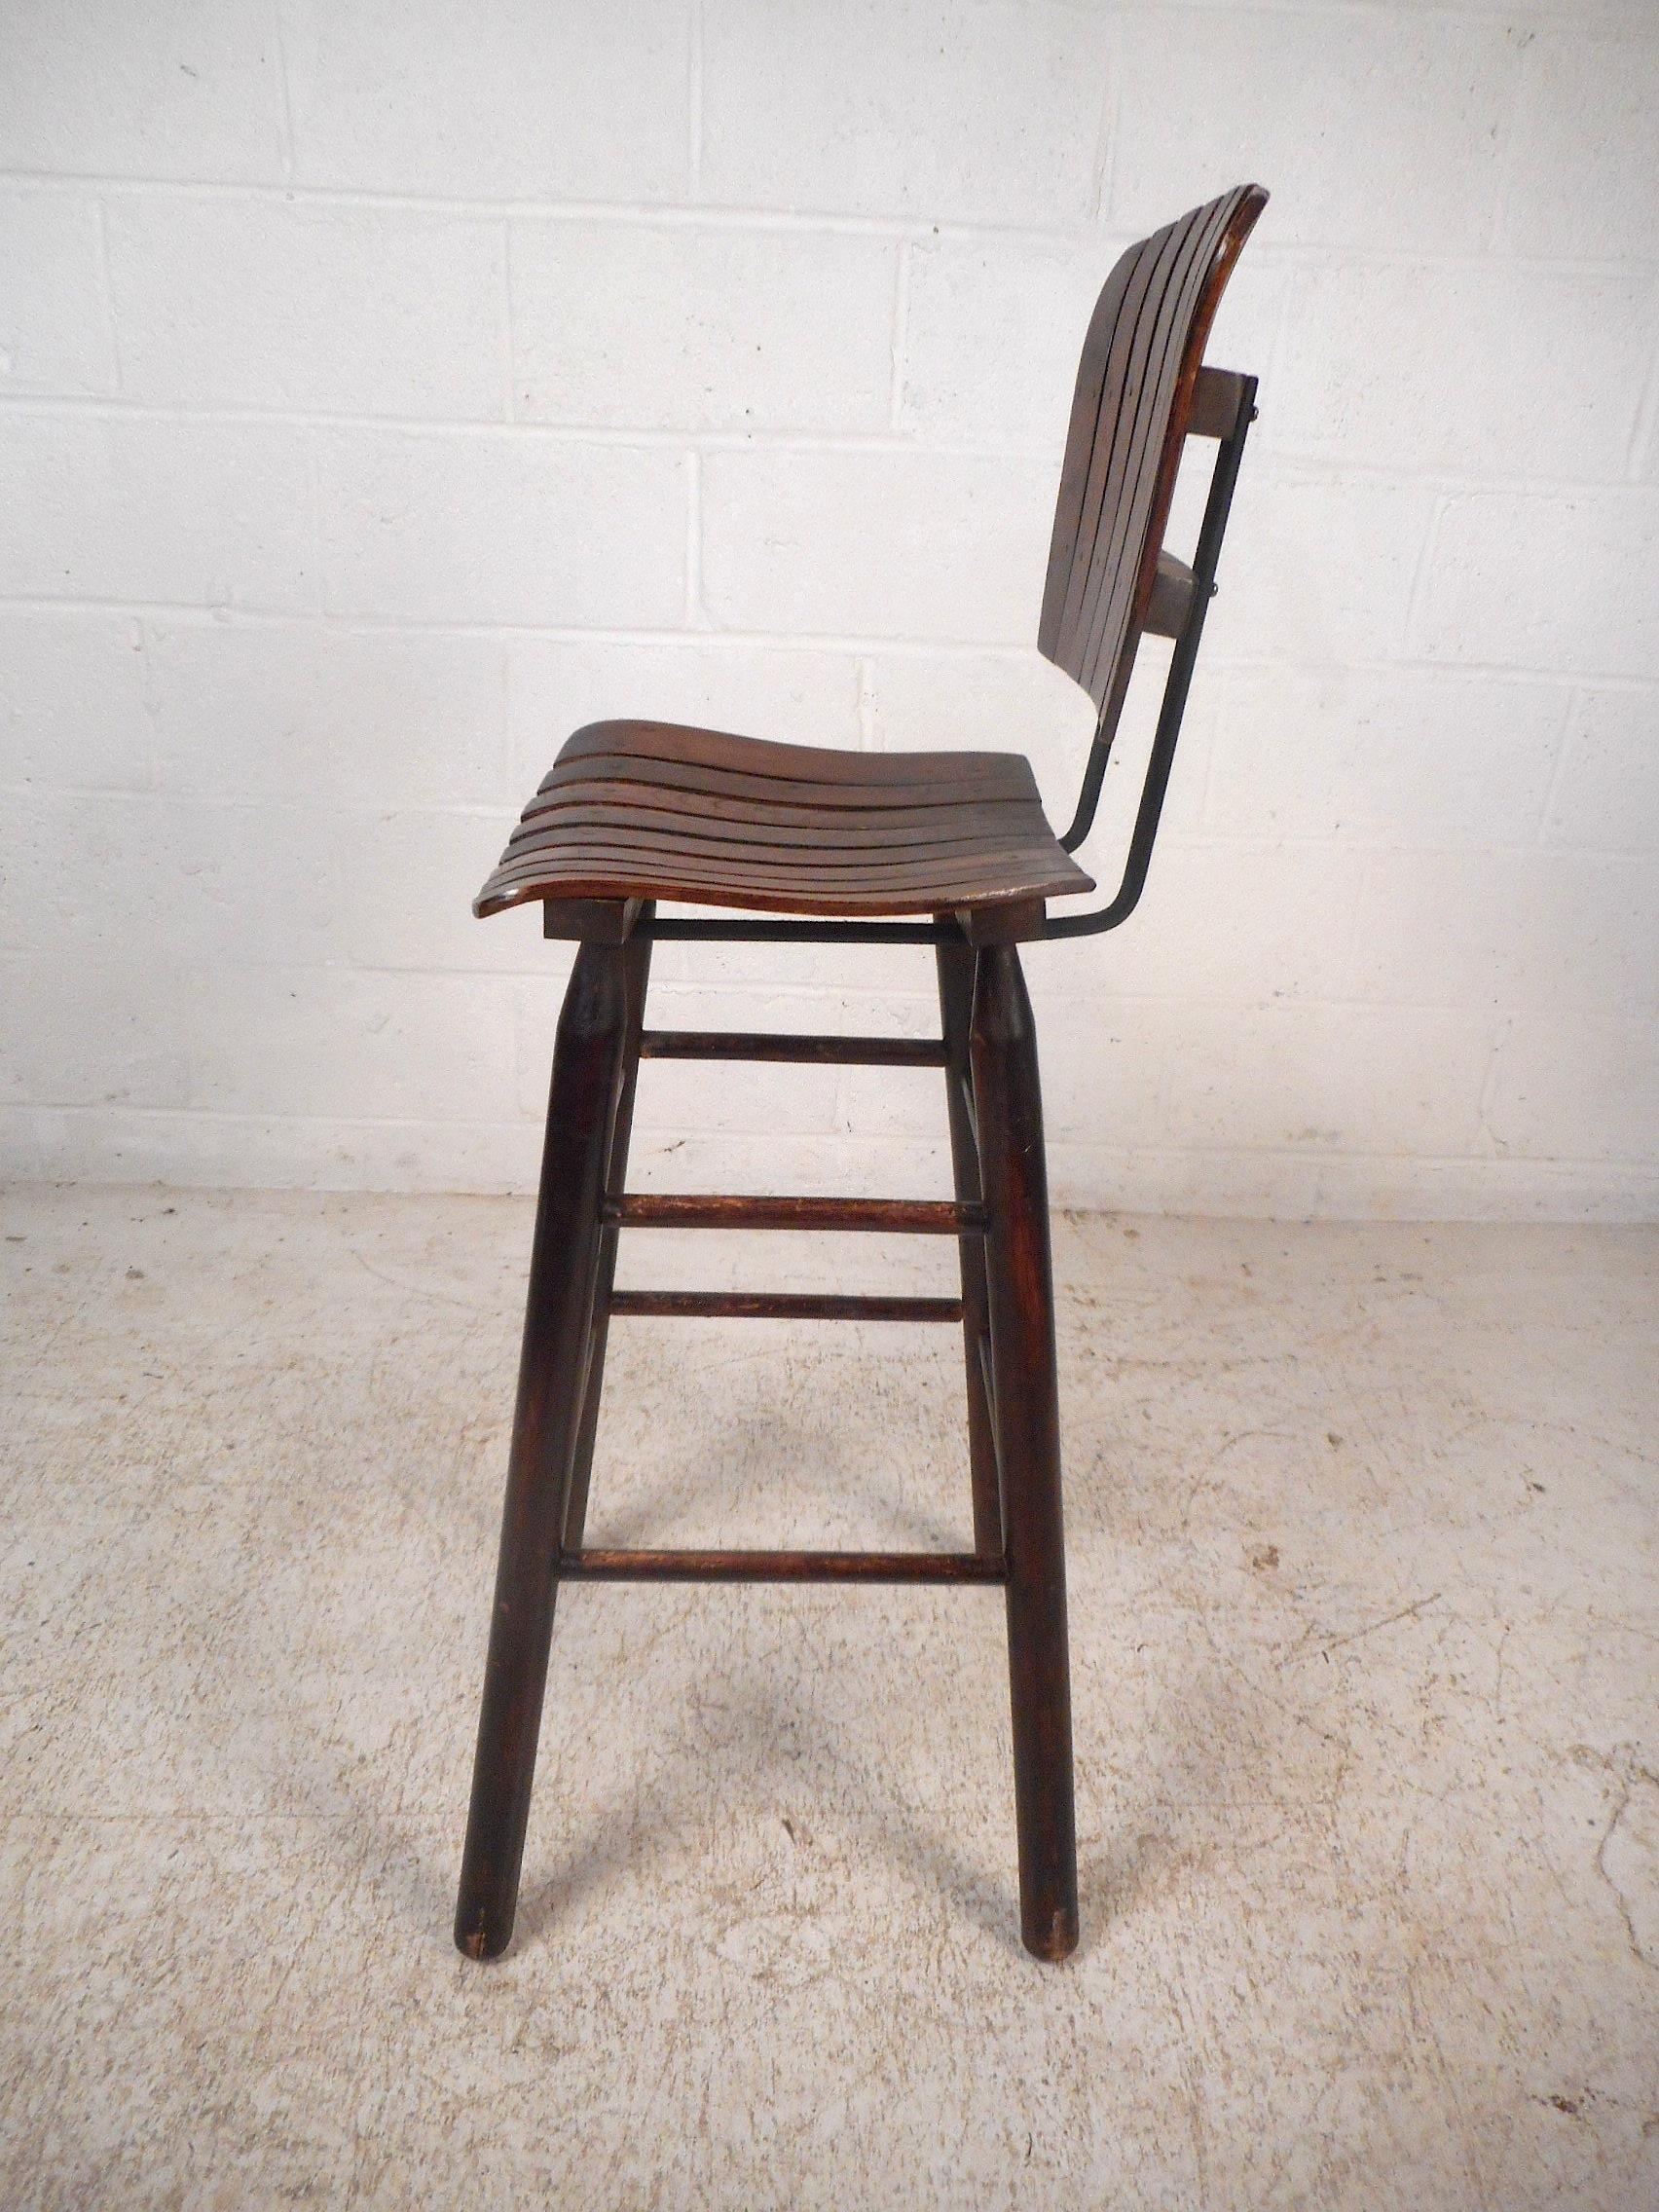 Vintage Modern Wood-Slat Stools In Good Condition For Sale In Brooklyn, NY